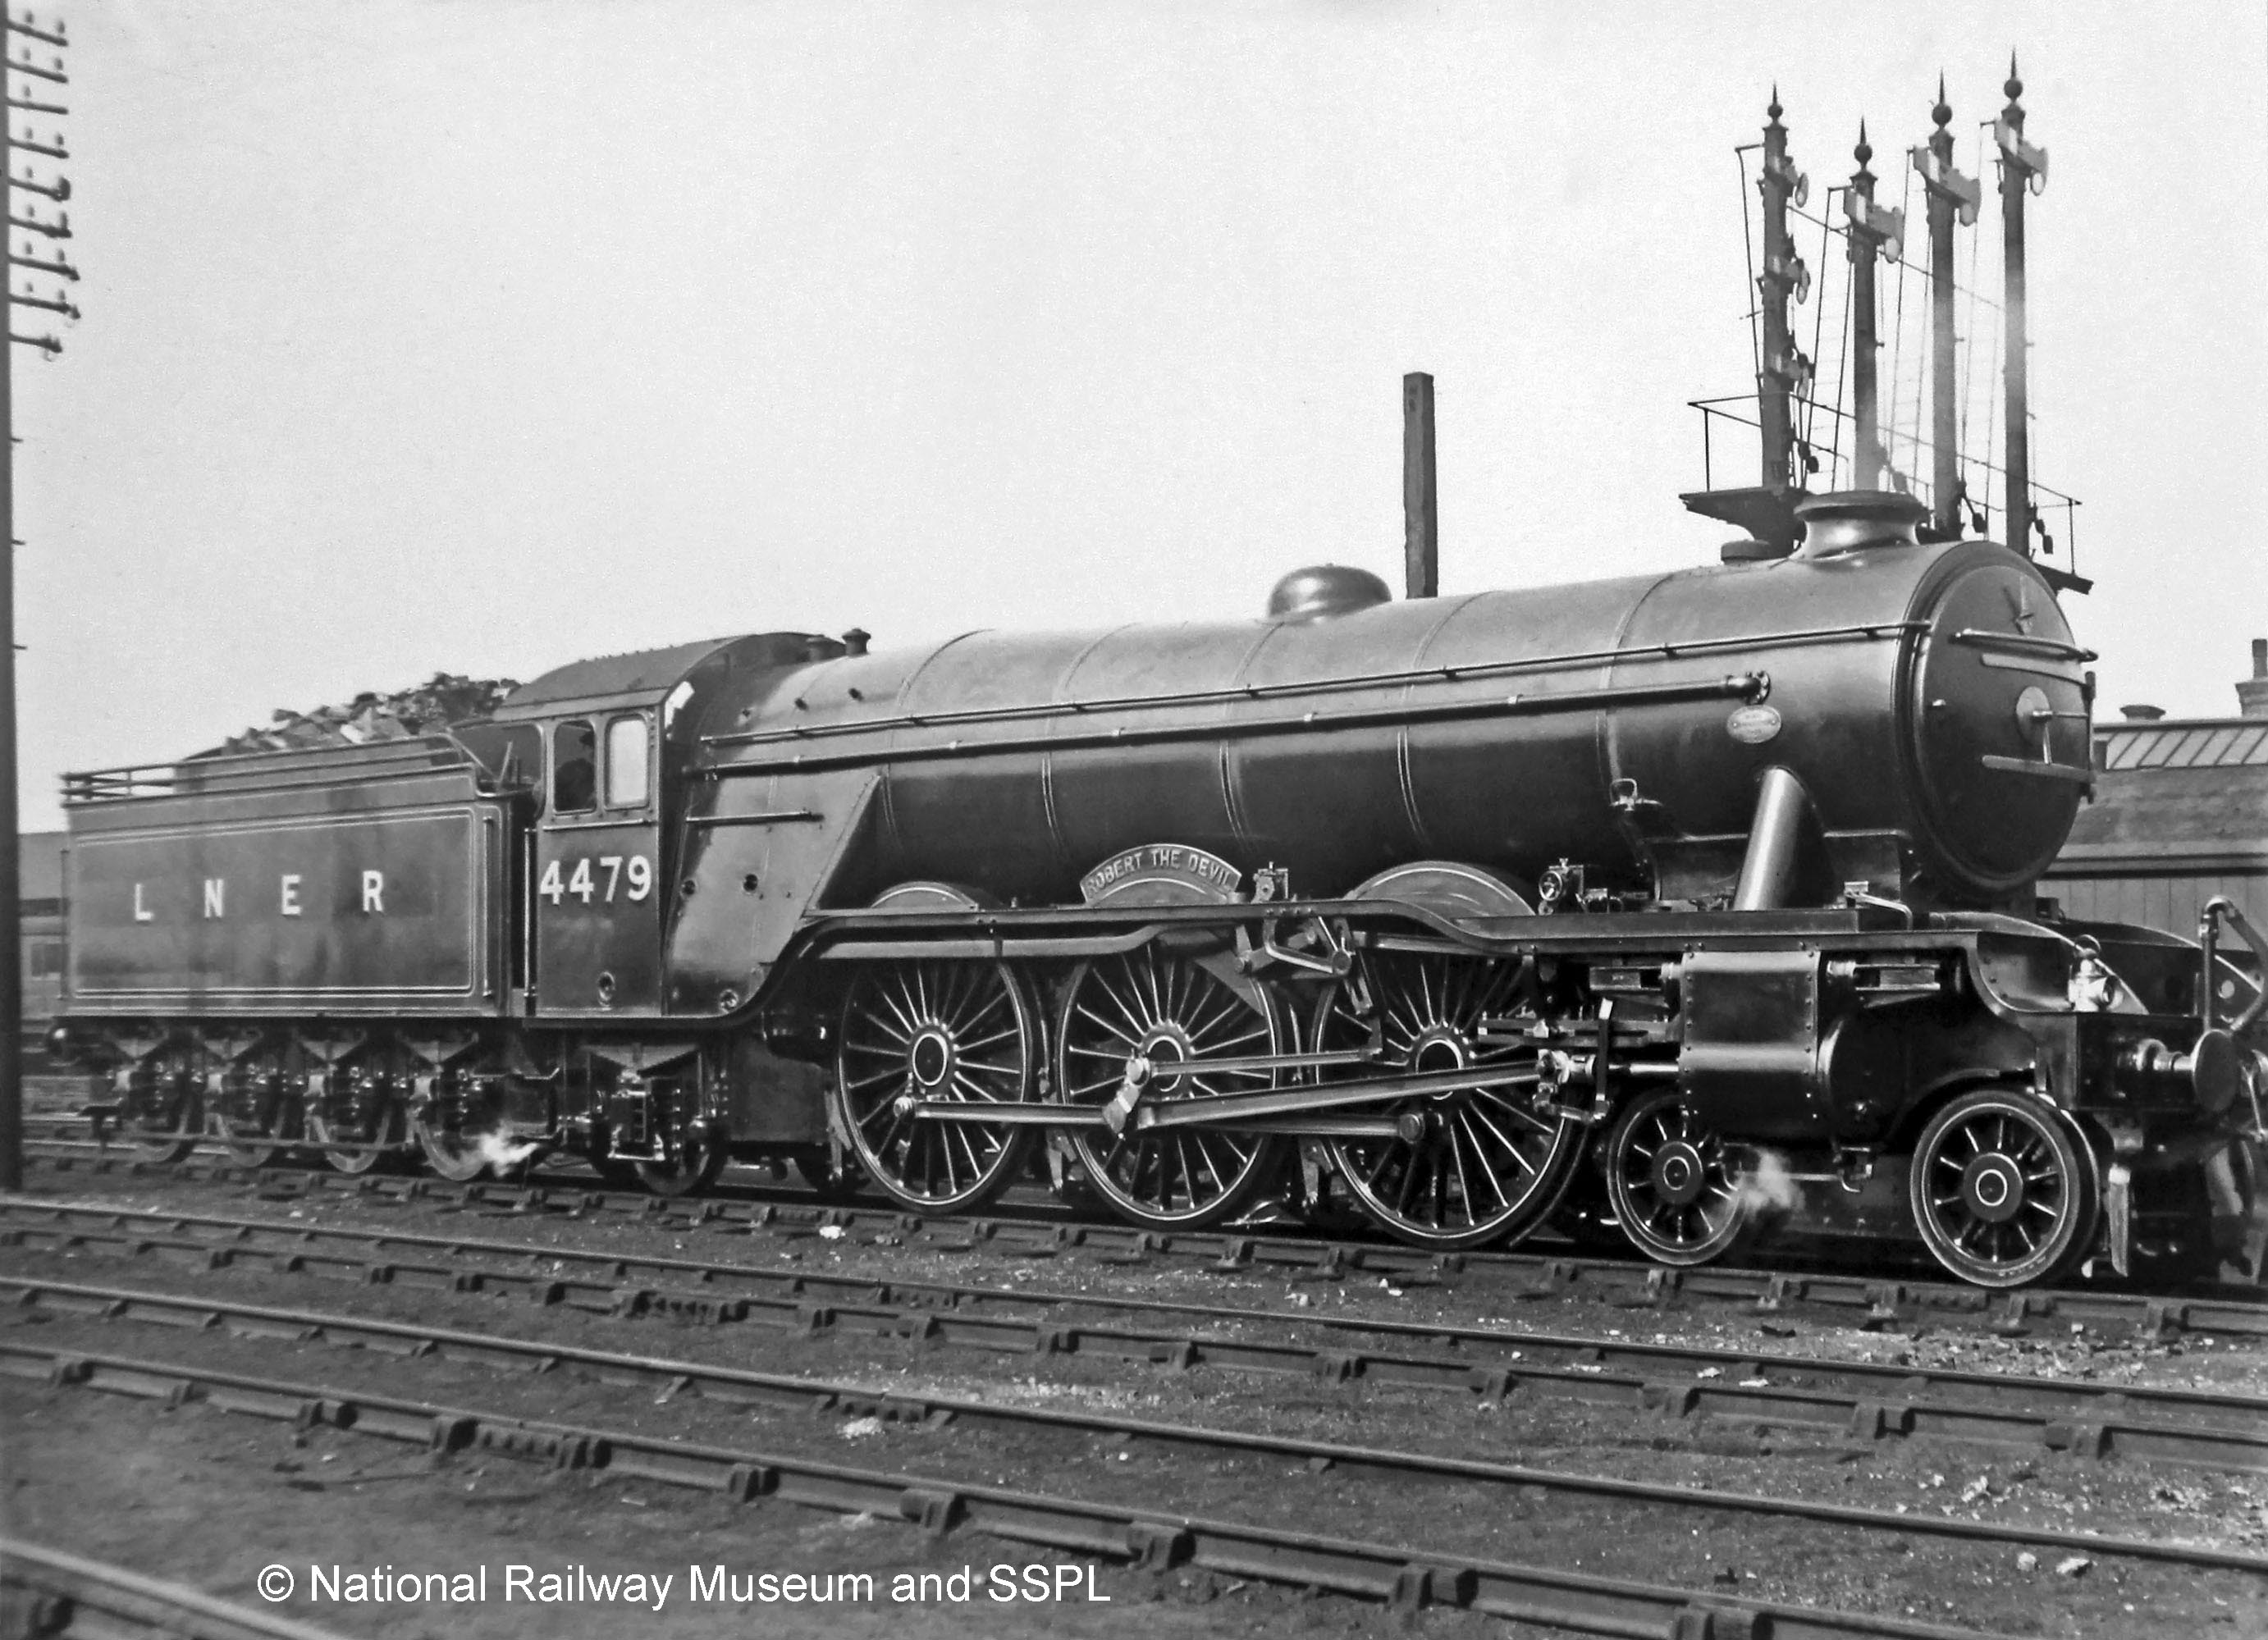 No. 4479 Robert the Devil at Grantham shed in 1930. Photograph by Rev. A. C. Cawston.